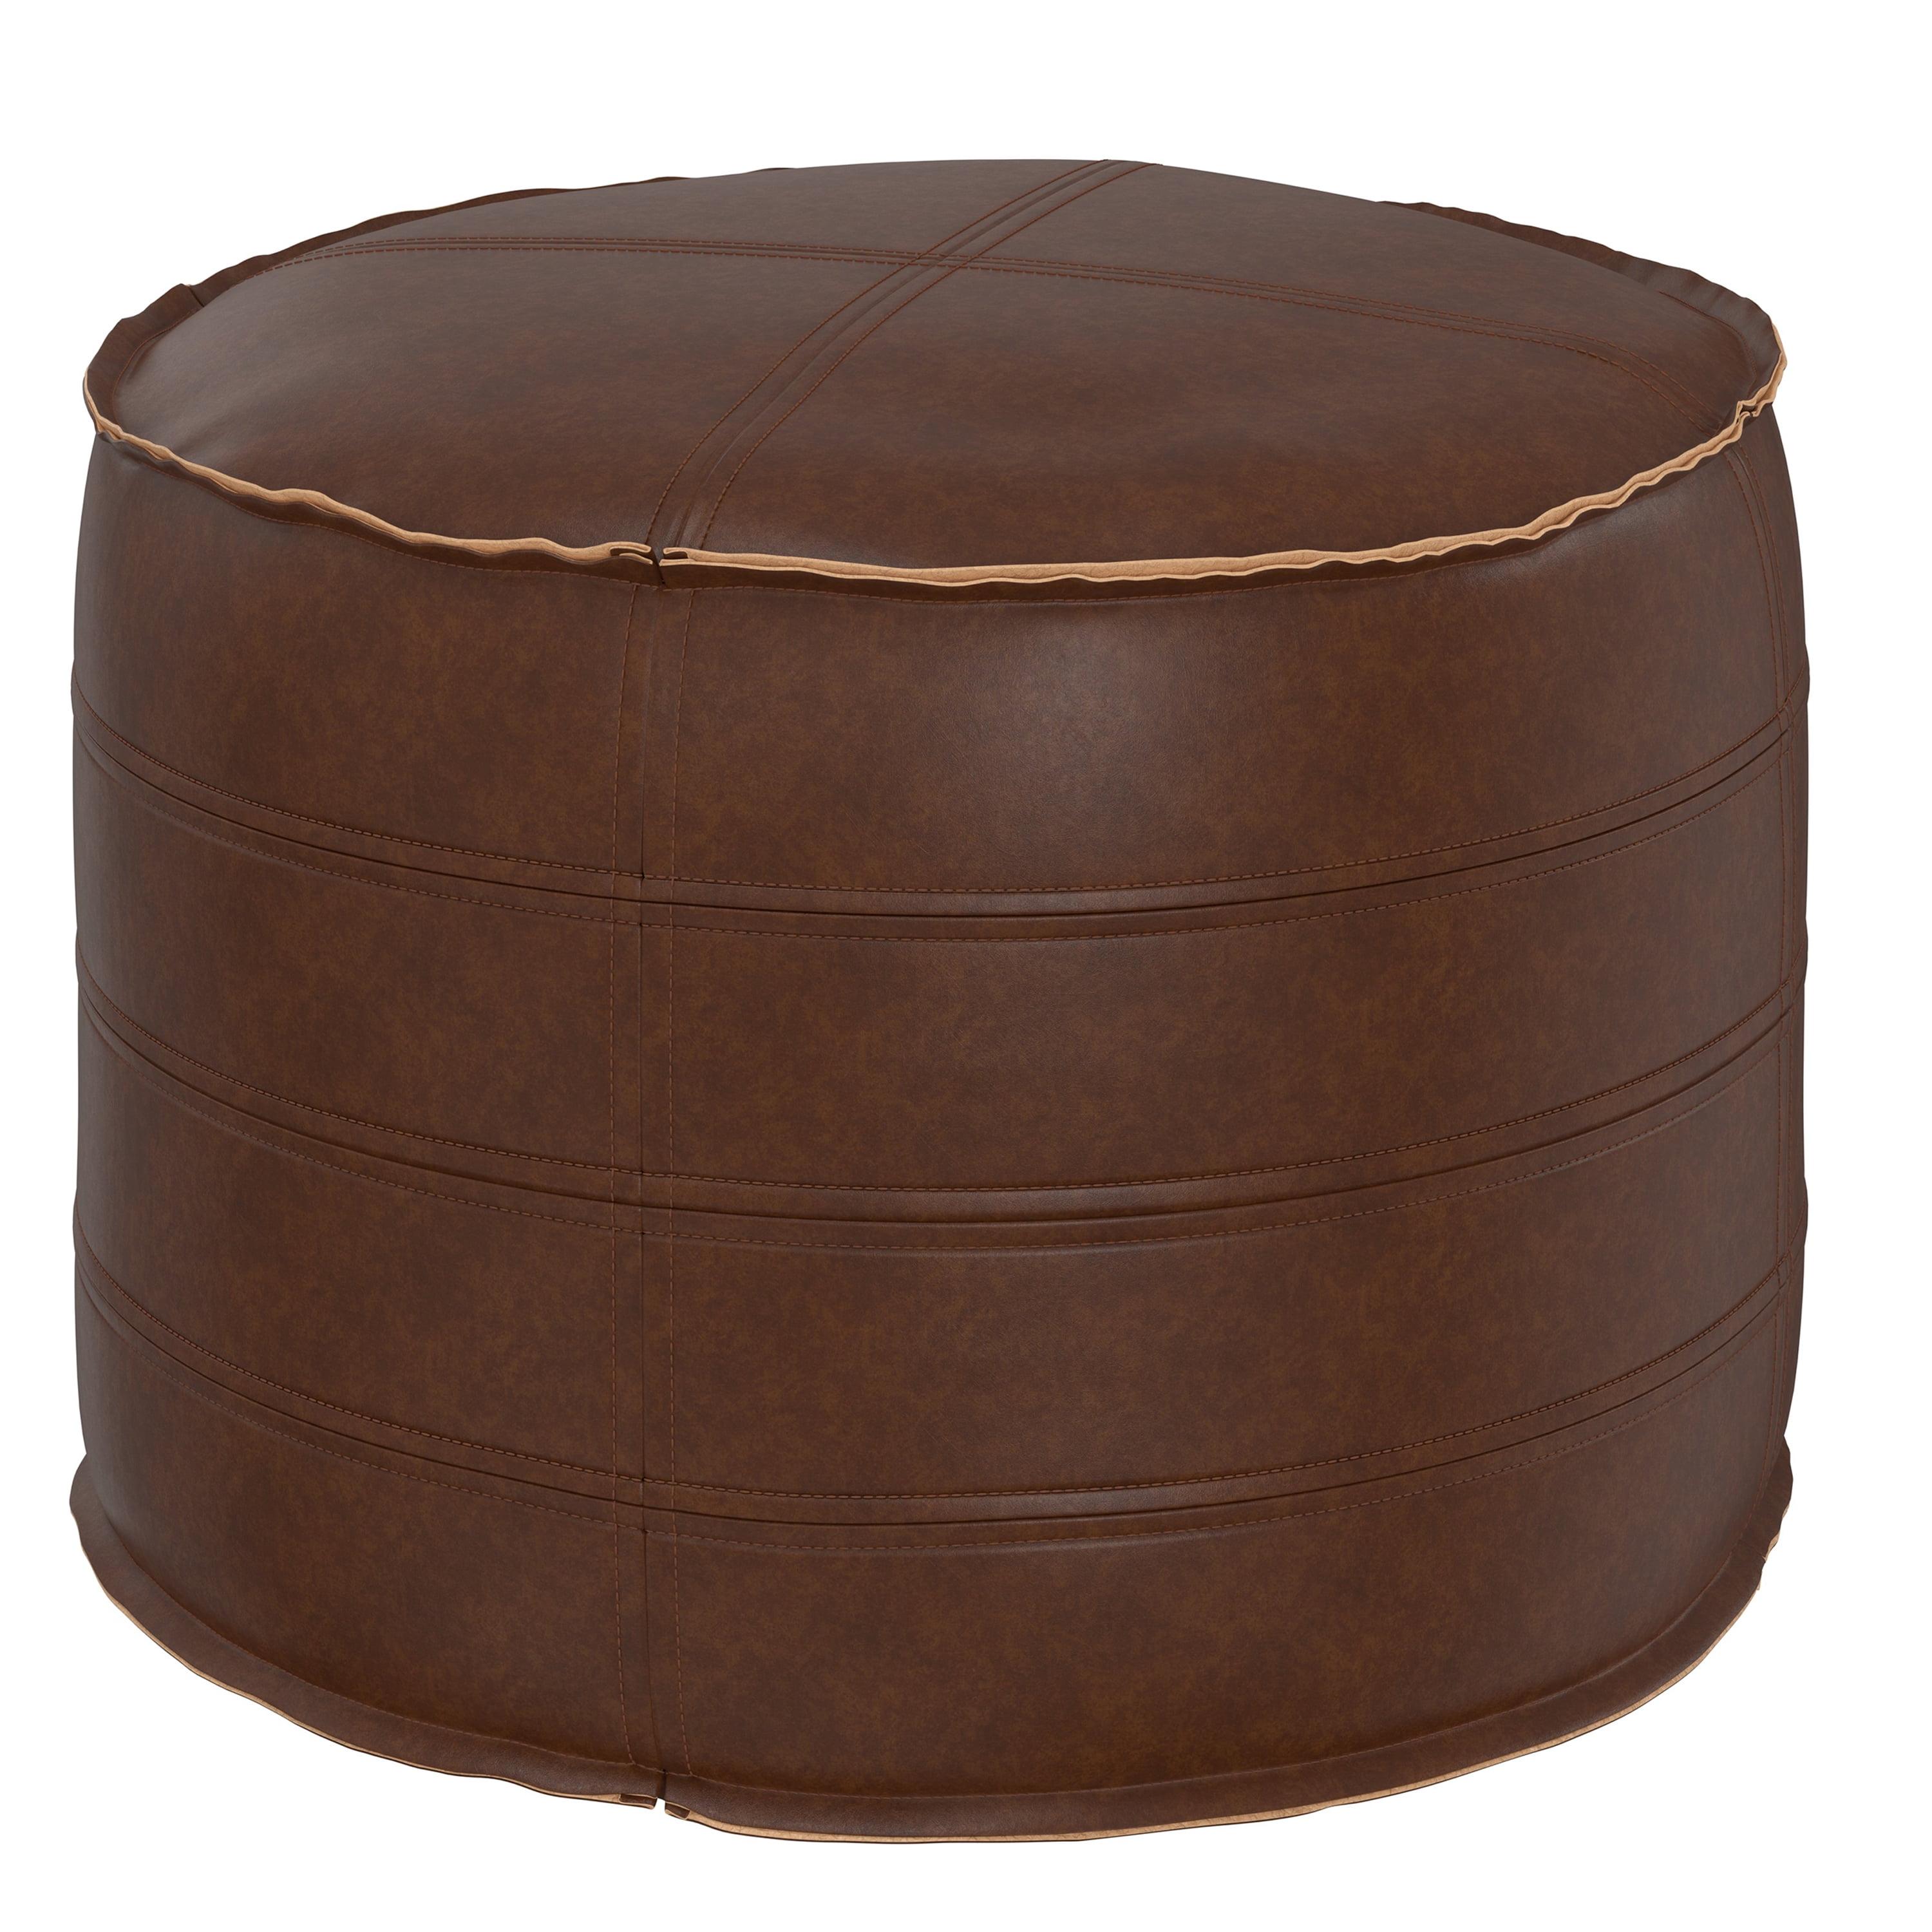 Brody Distressed Dark Brown Faux Leather Round Pouf, 20"